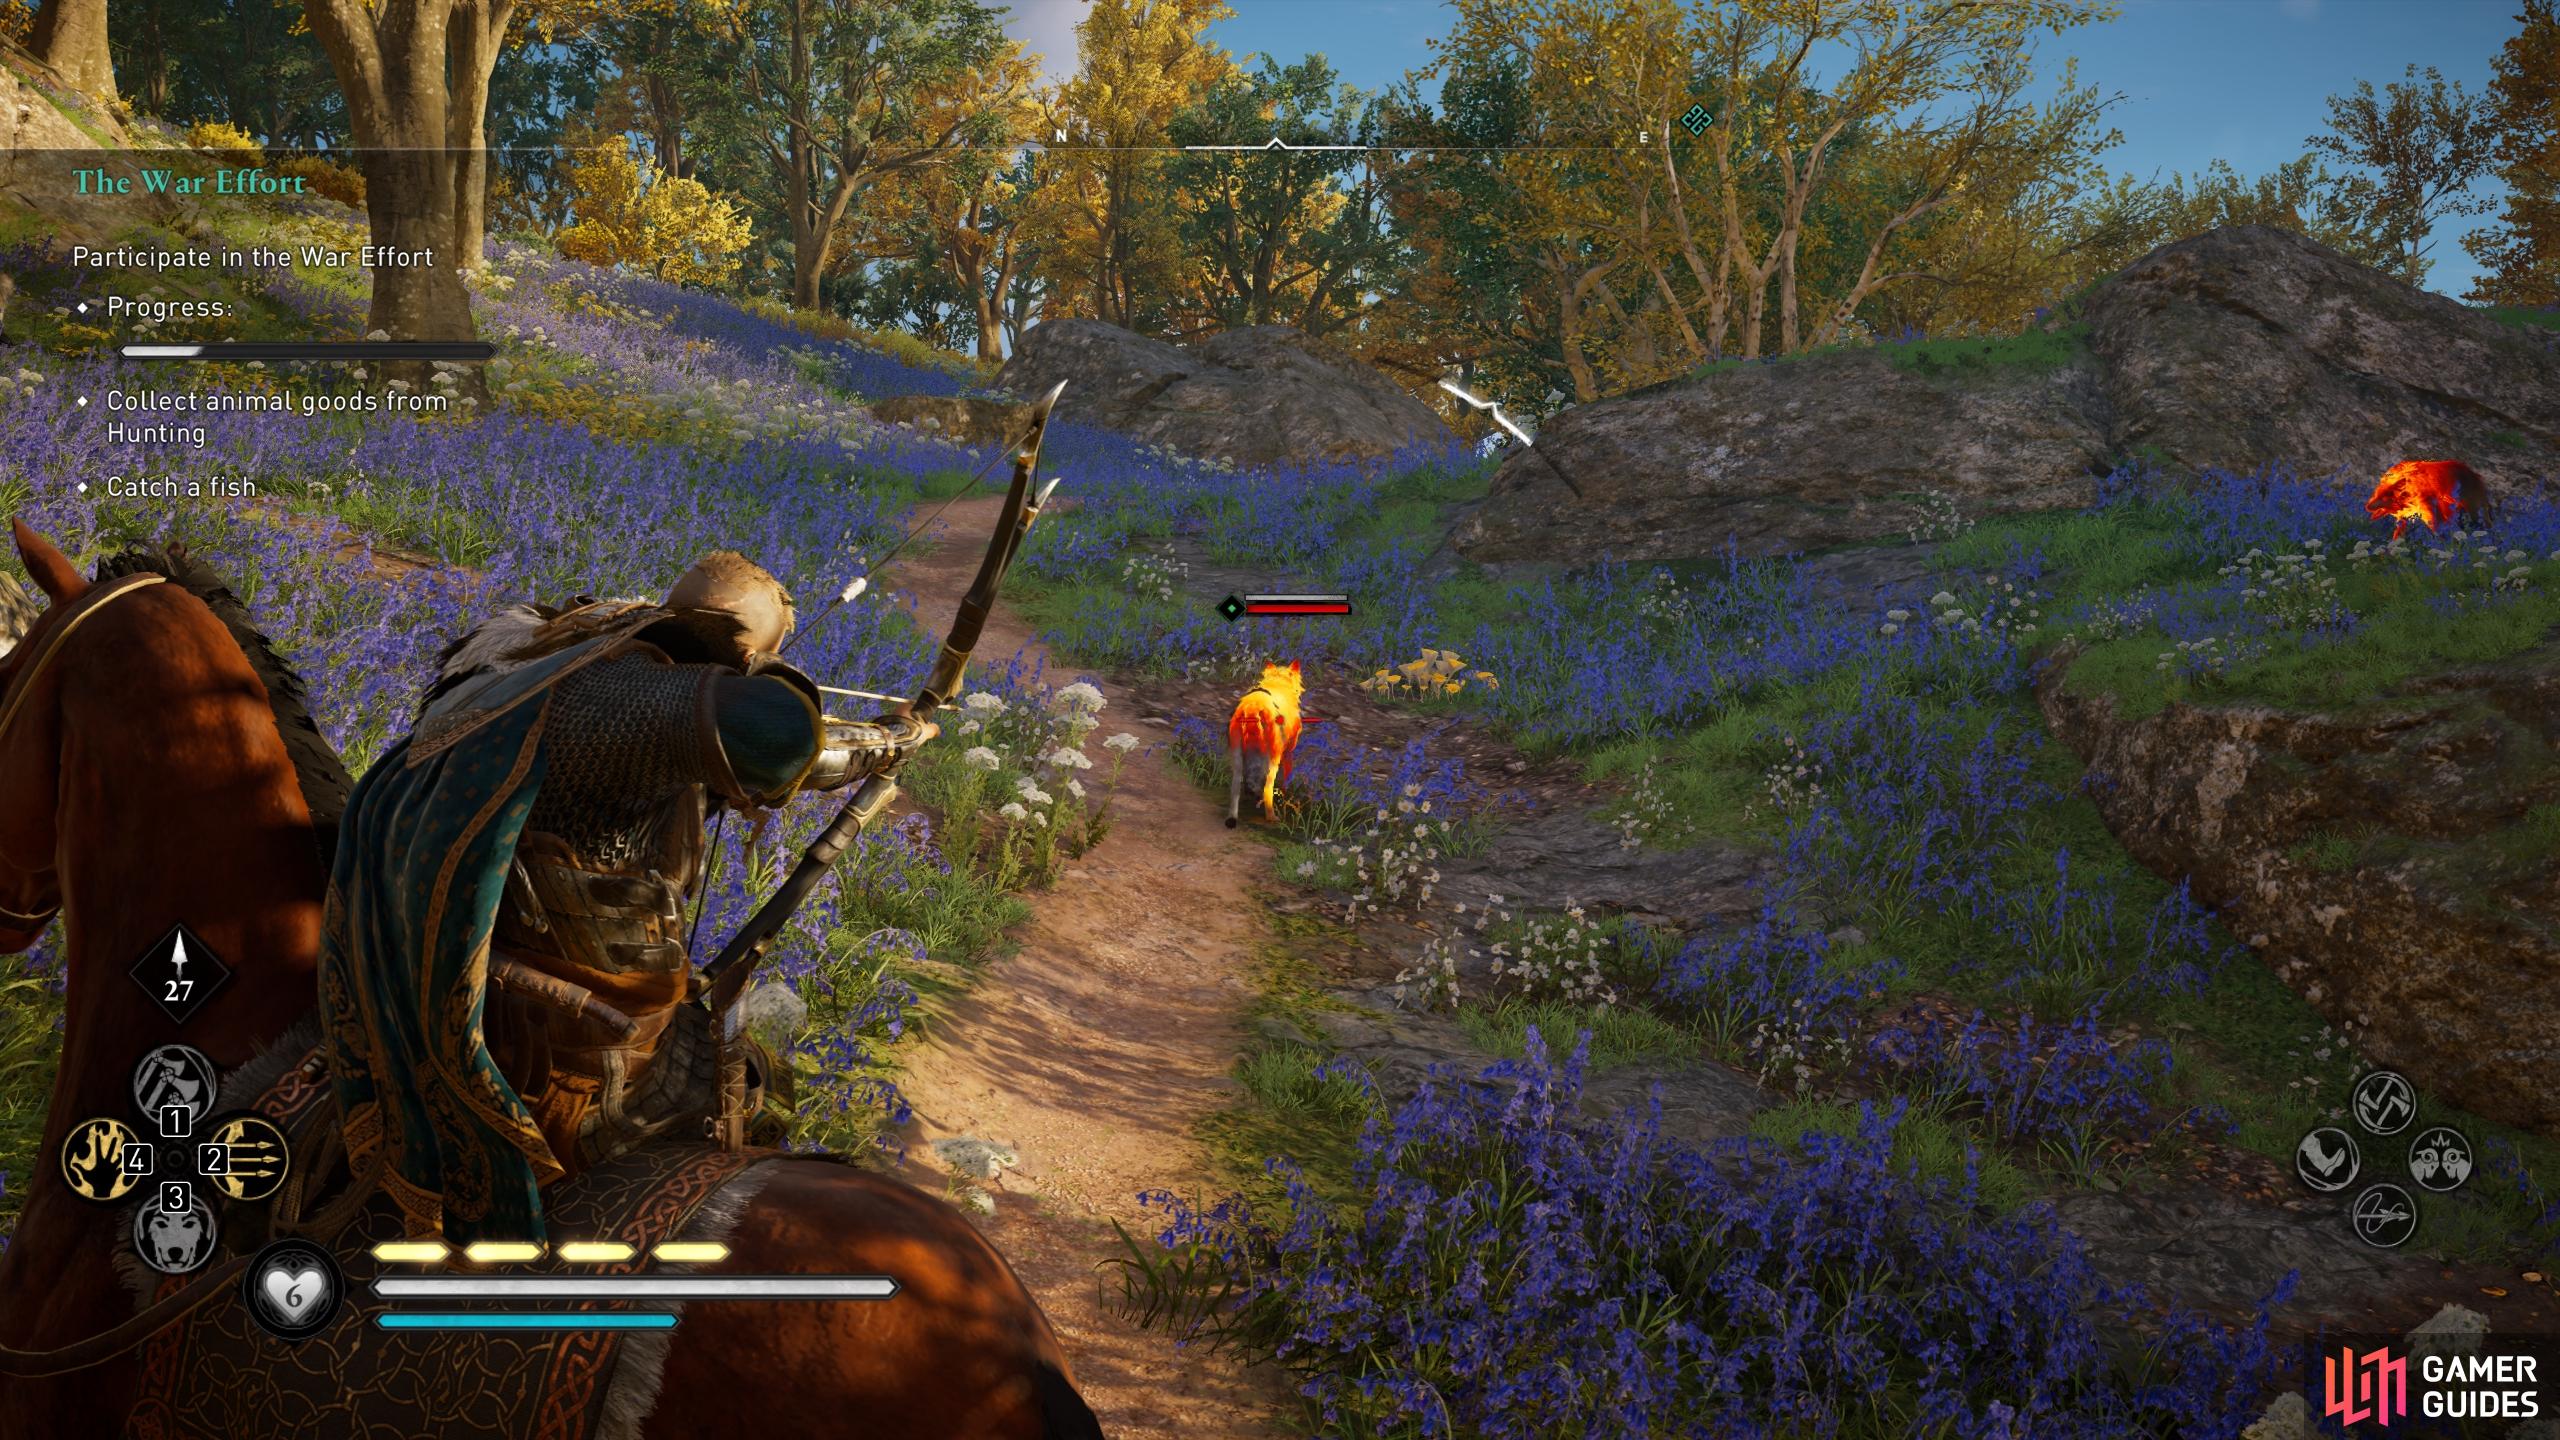 You can kill and loot the wolves in the woods east of Ravensthorpe to collect animal goods.